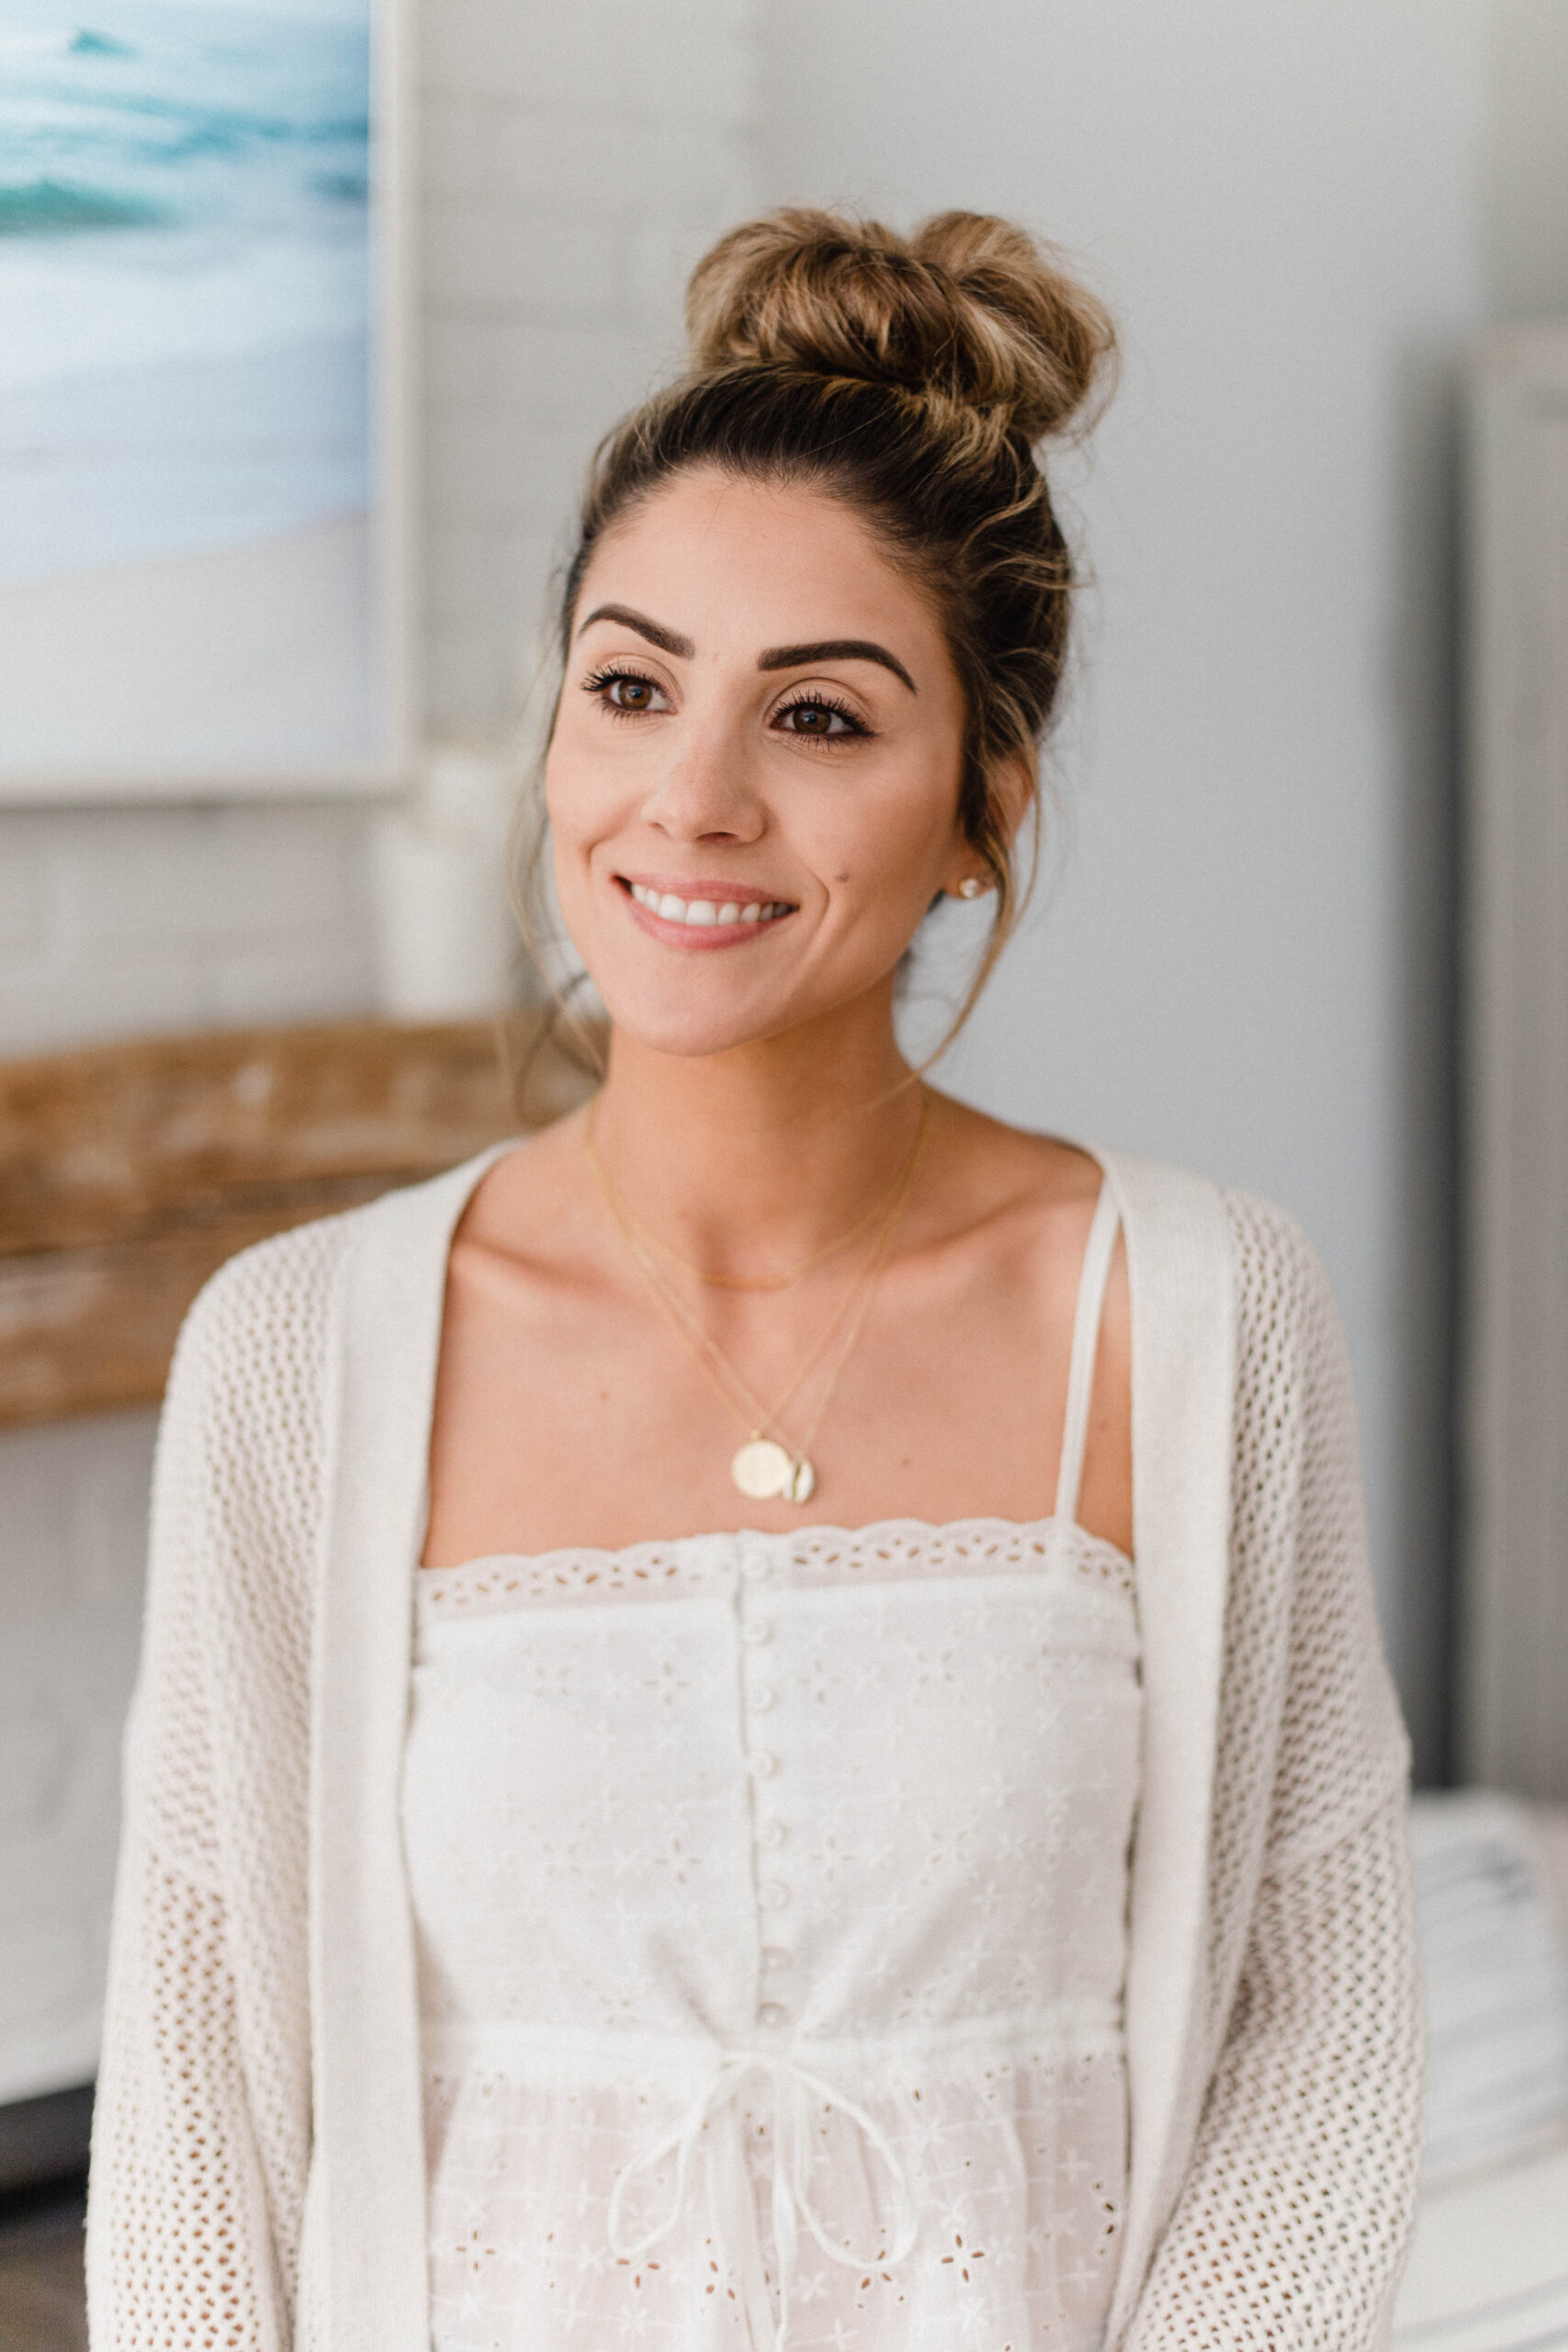 Connecticut life and style blogger Lauren McBride shares her everyday jewelry, including necklaces, simple earrings, and name bracelets. 